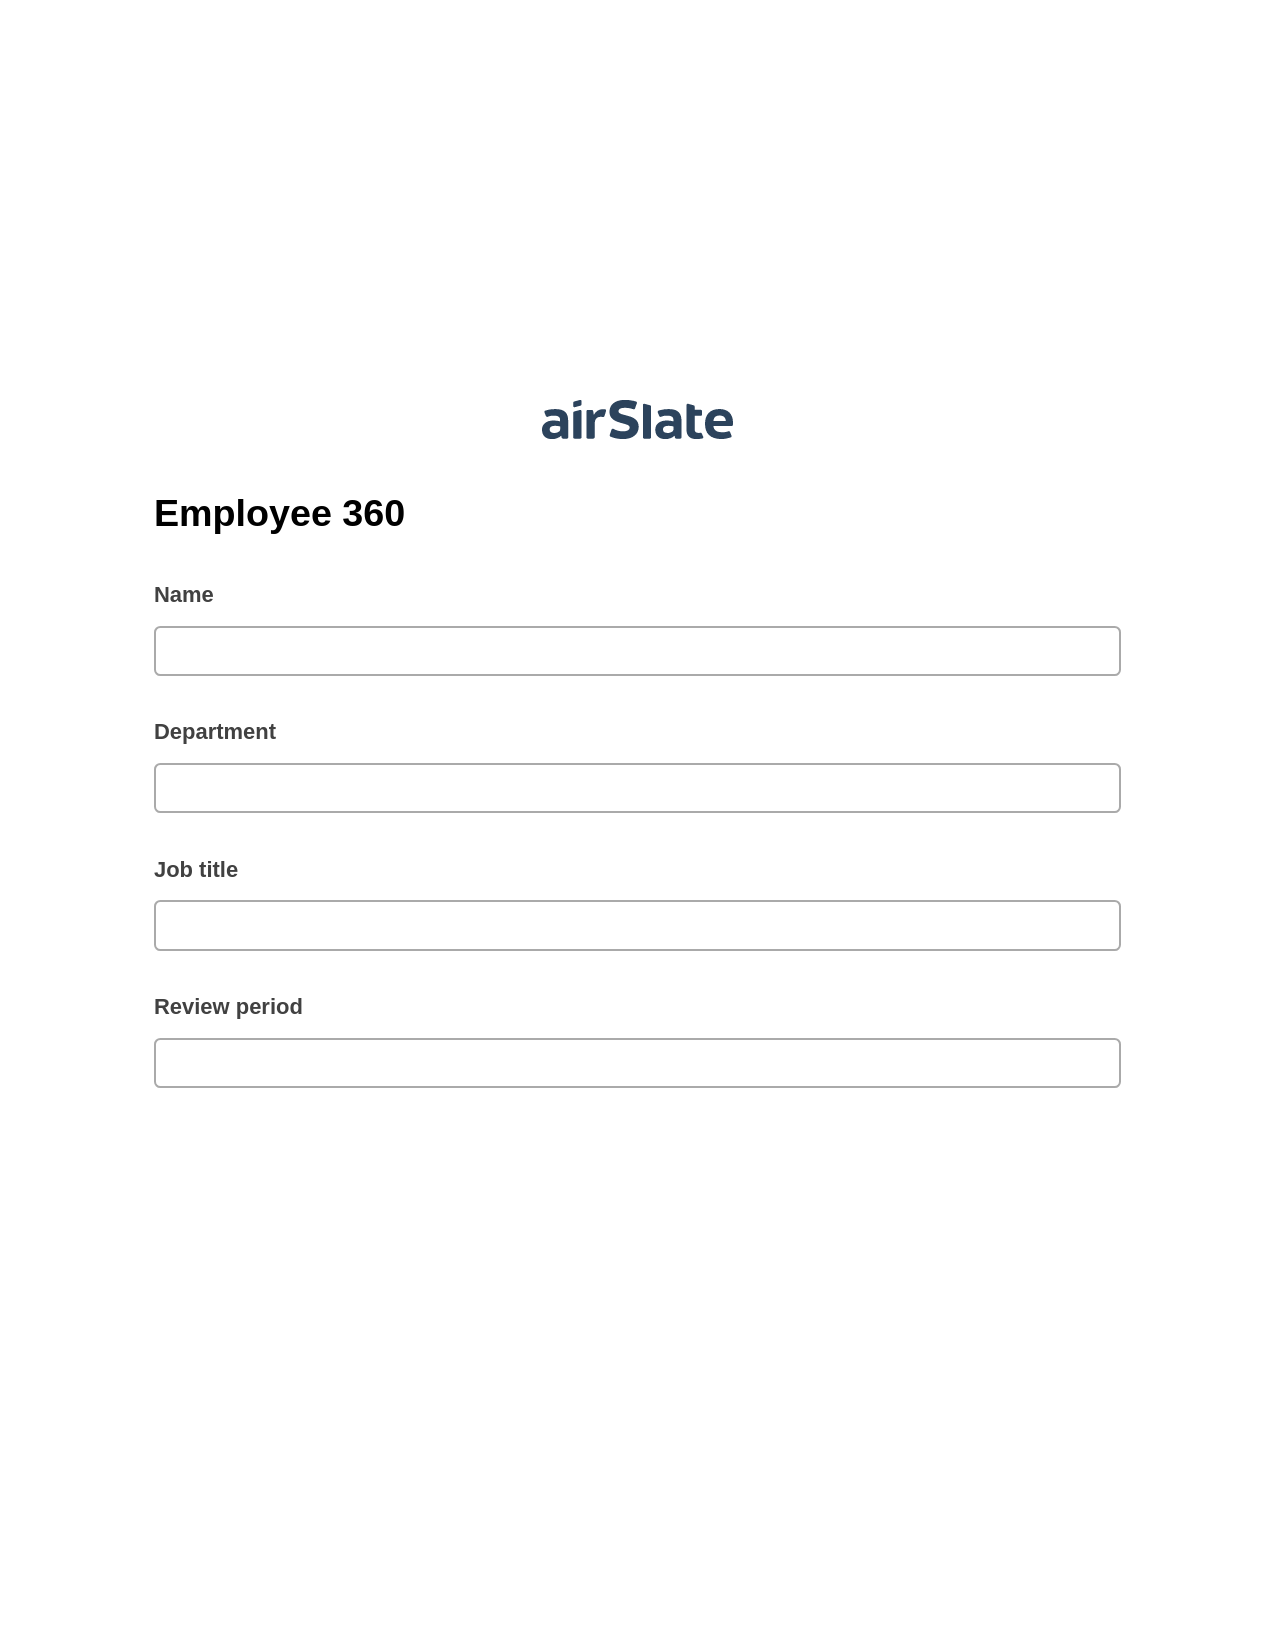 Employee 360 Pre-fill from CSV File Bot, Roles Reminder Bot, Email Notification Postfinish Bot